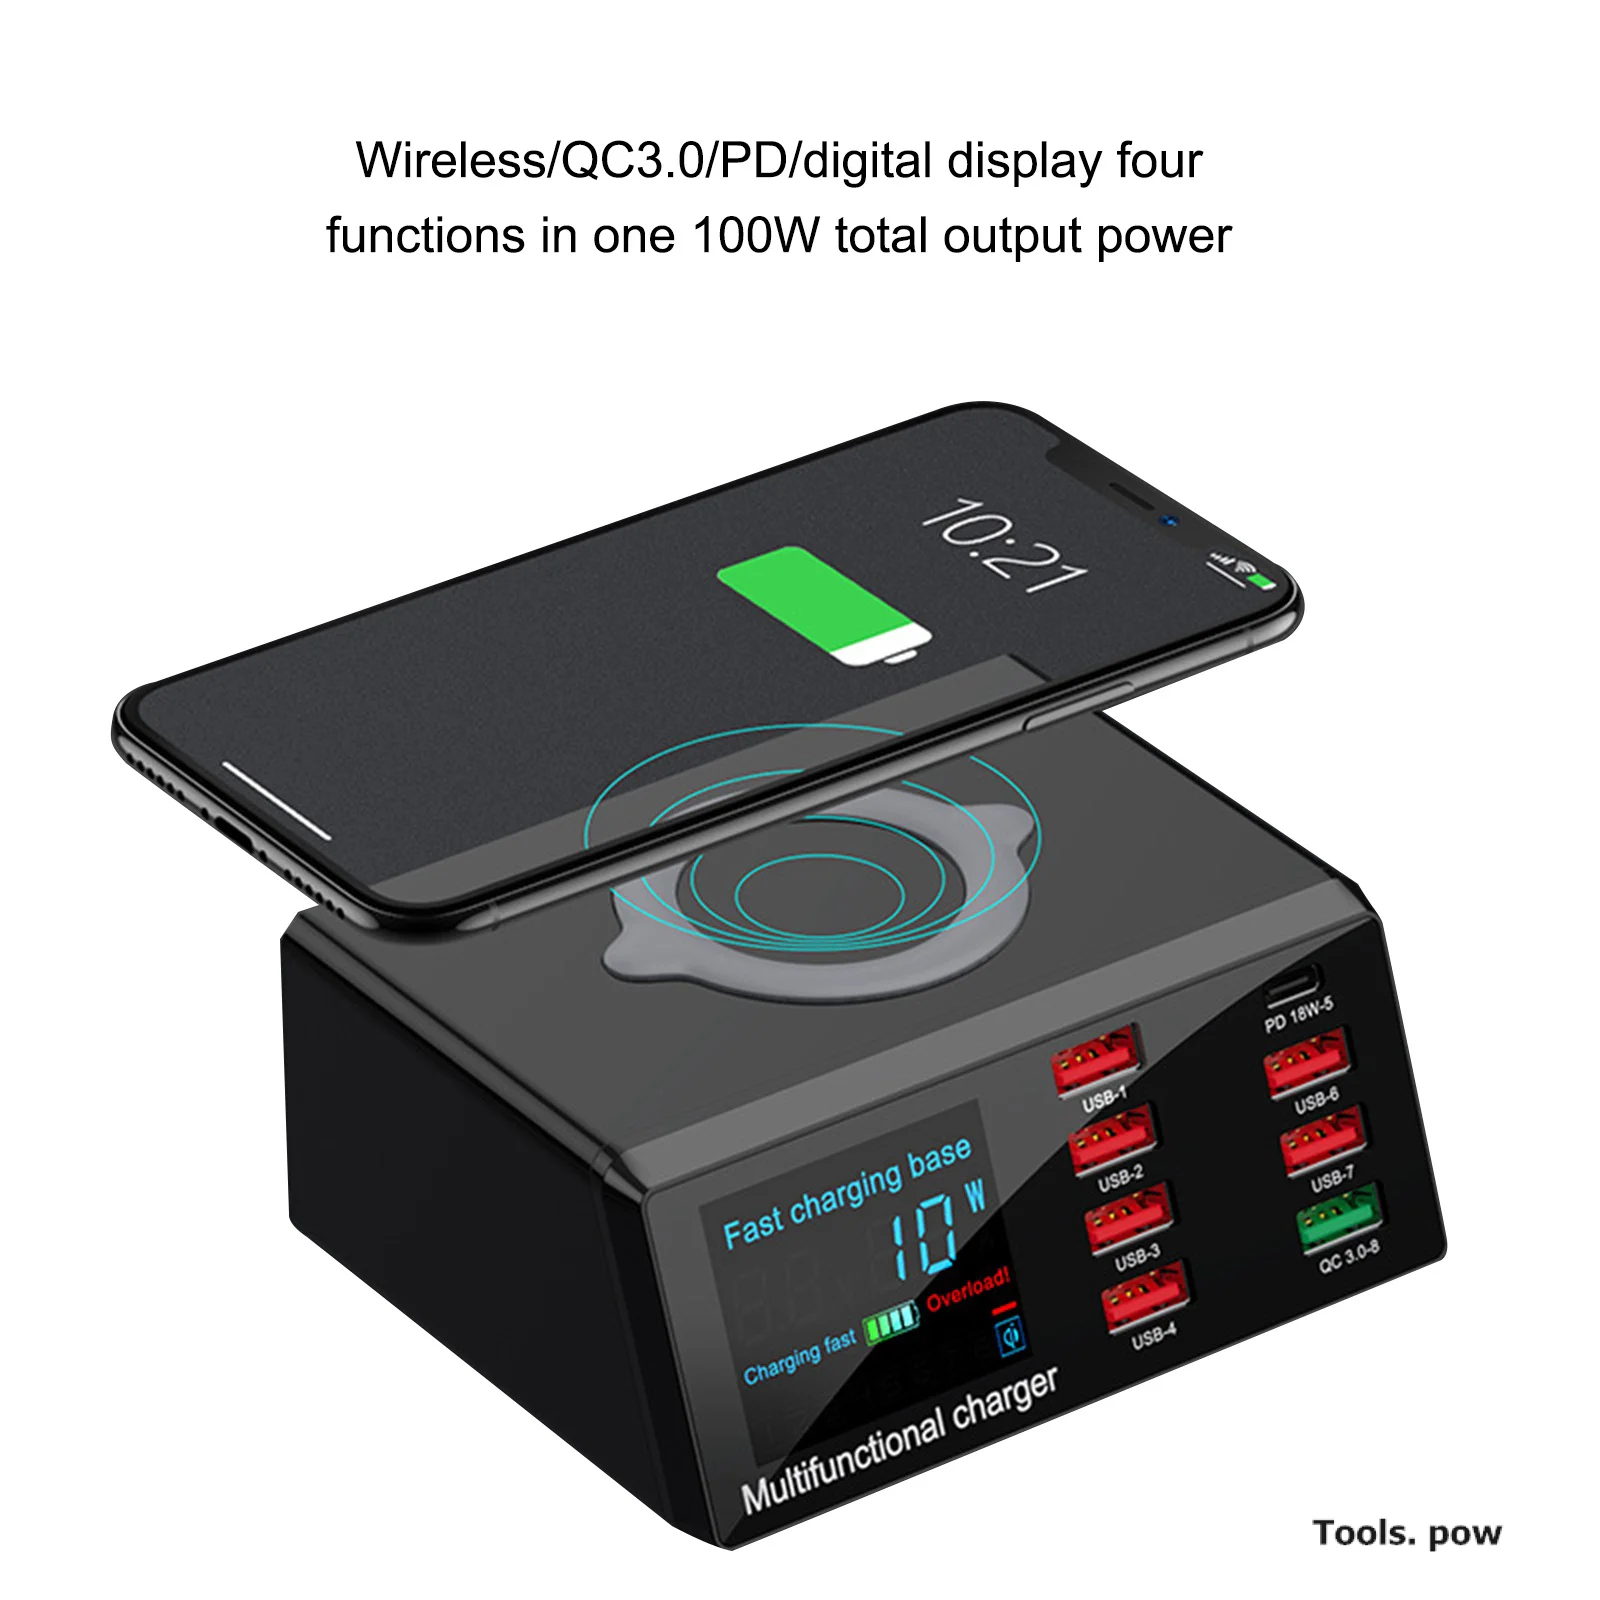 

8 USB Ports Wireless Charger Station 100W PD QC 3.0 Fast Charging Dock Phone Charger EU/US/UK/AU Model